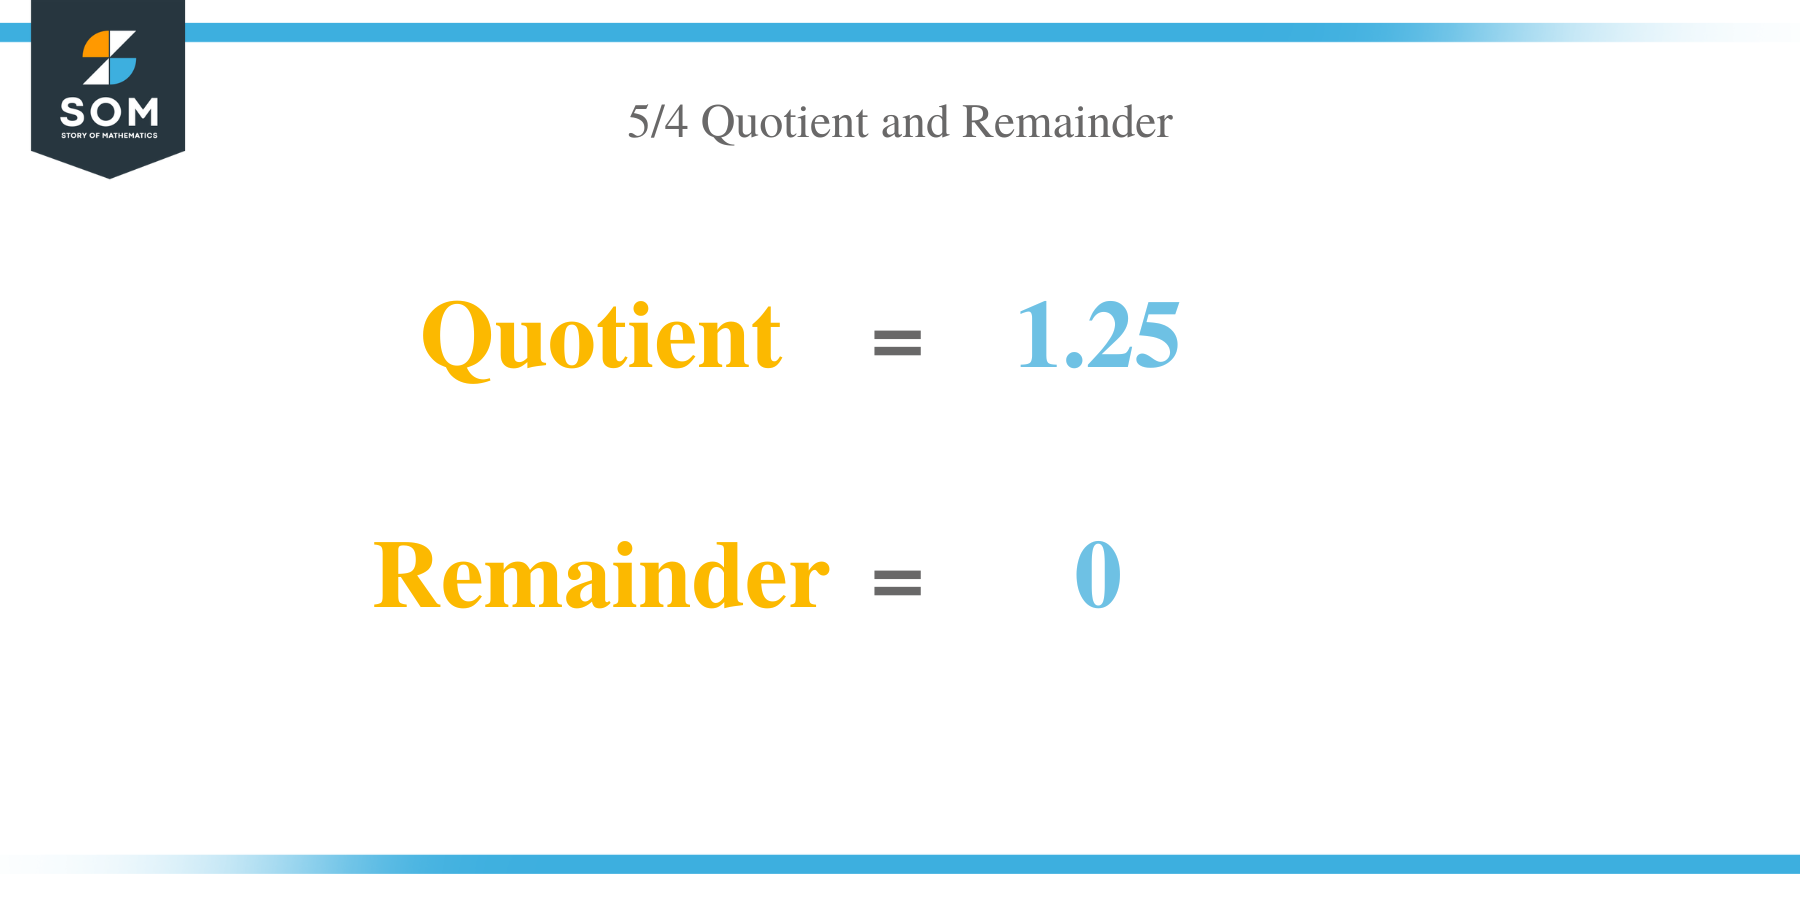 Quotient and Remainer of 5 per 4